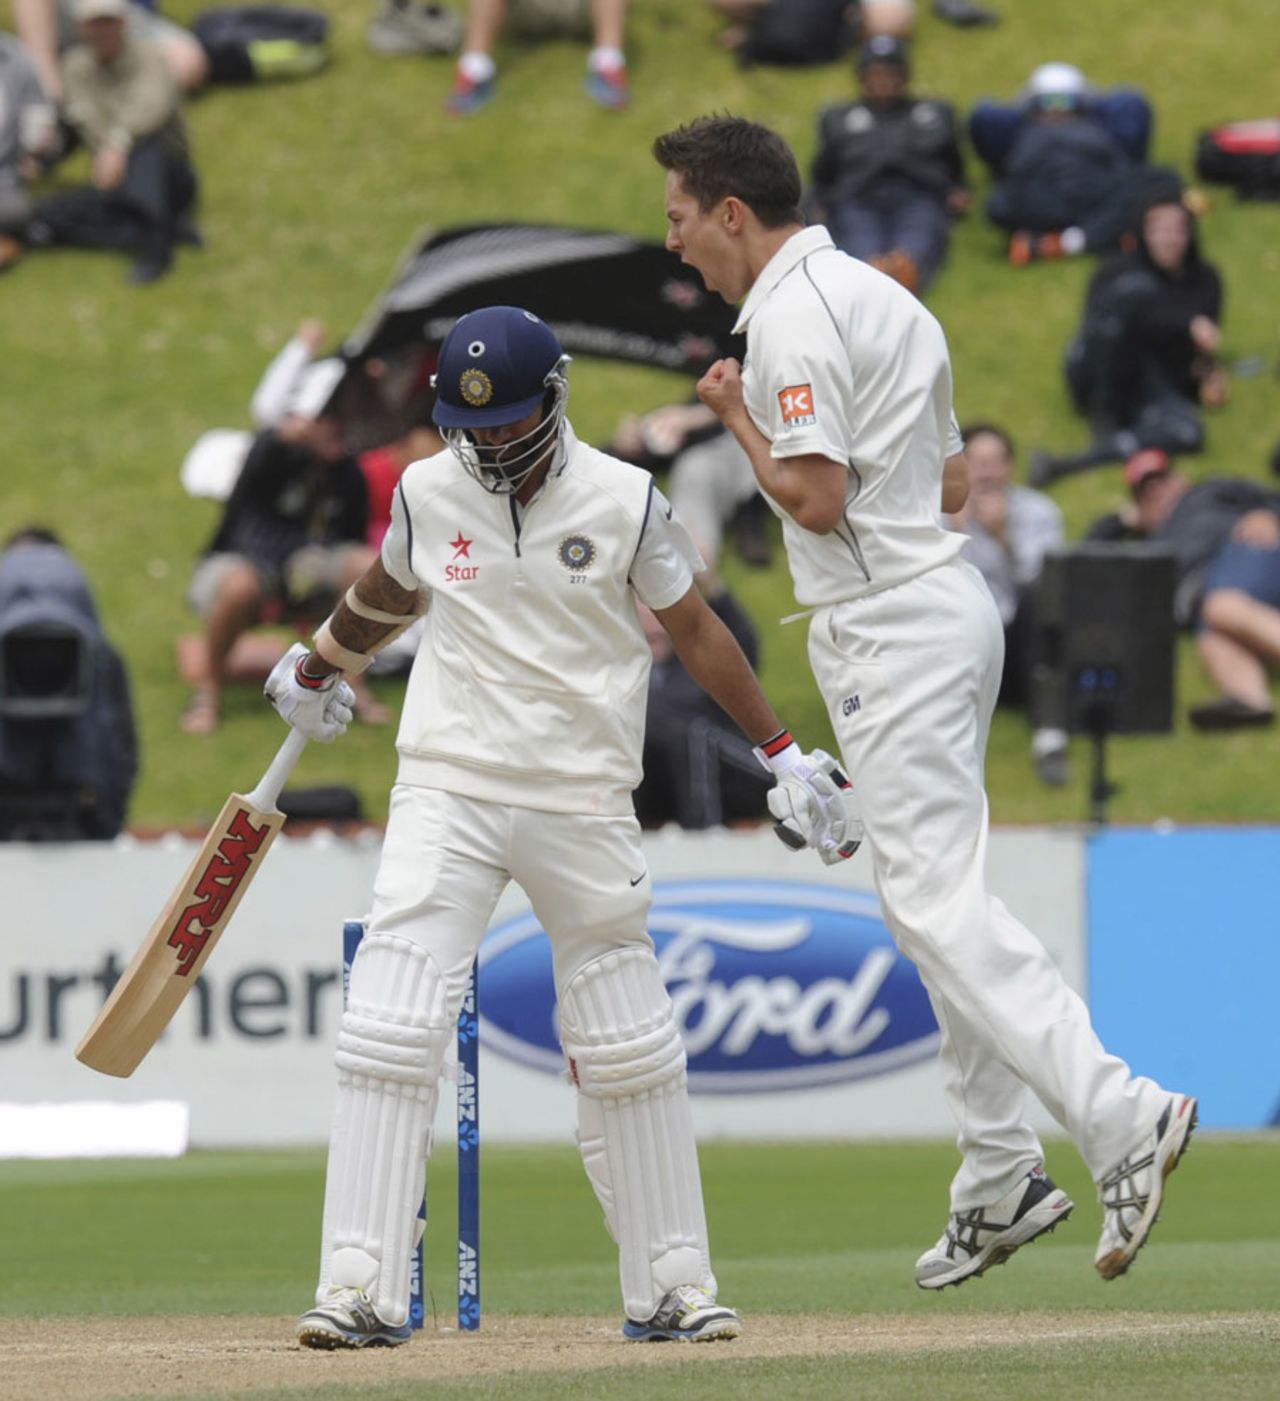 Trent Boult trapped Shikhar Dhawan lbw, New Zealand v India, 2nd Test, Wellington, 5th day, February 18, 2014